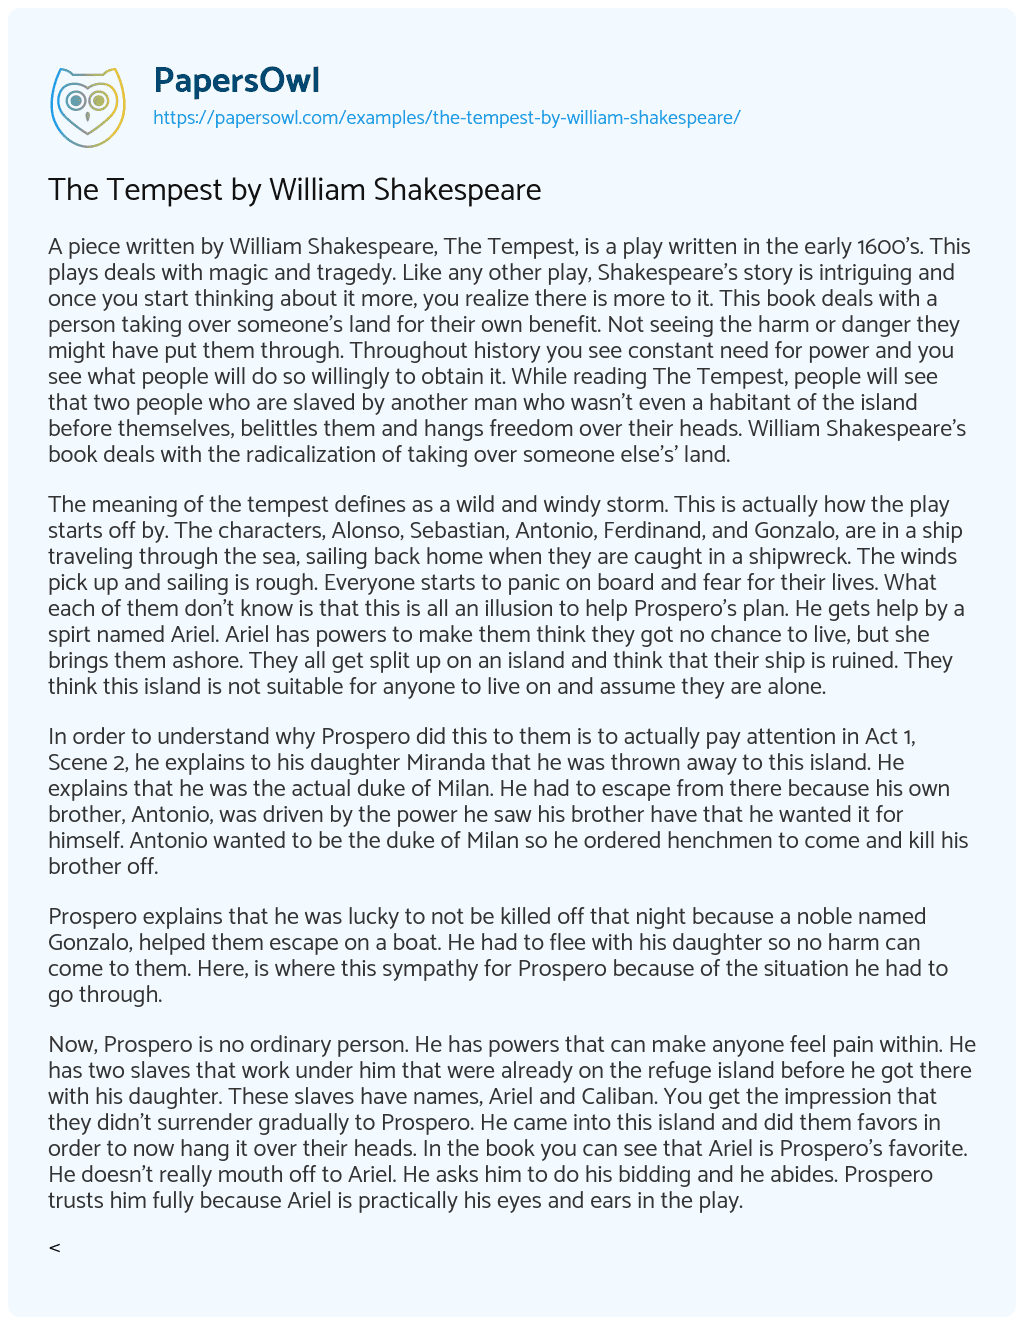 The Tempest by William Shakespeare essay